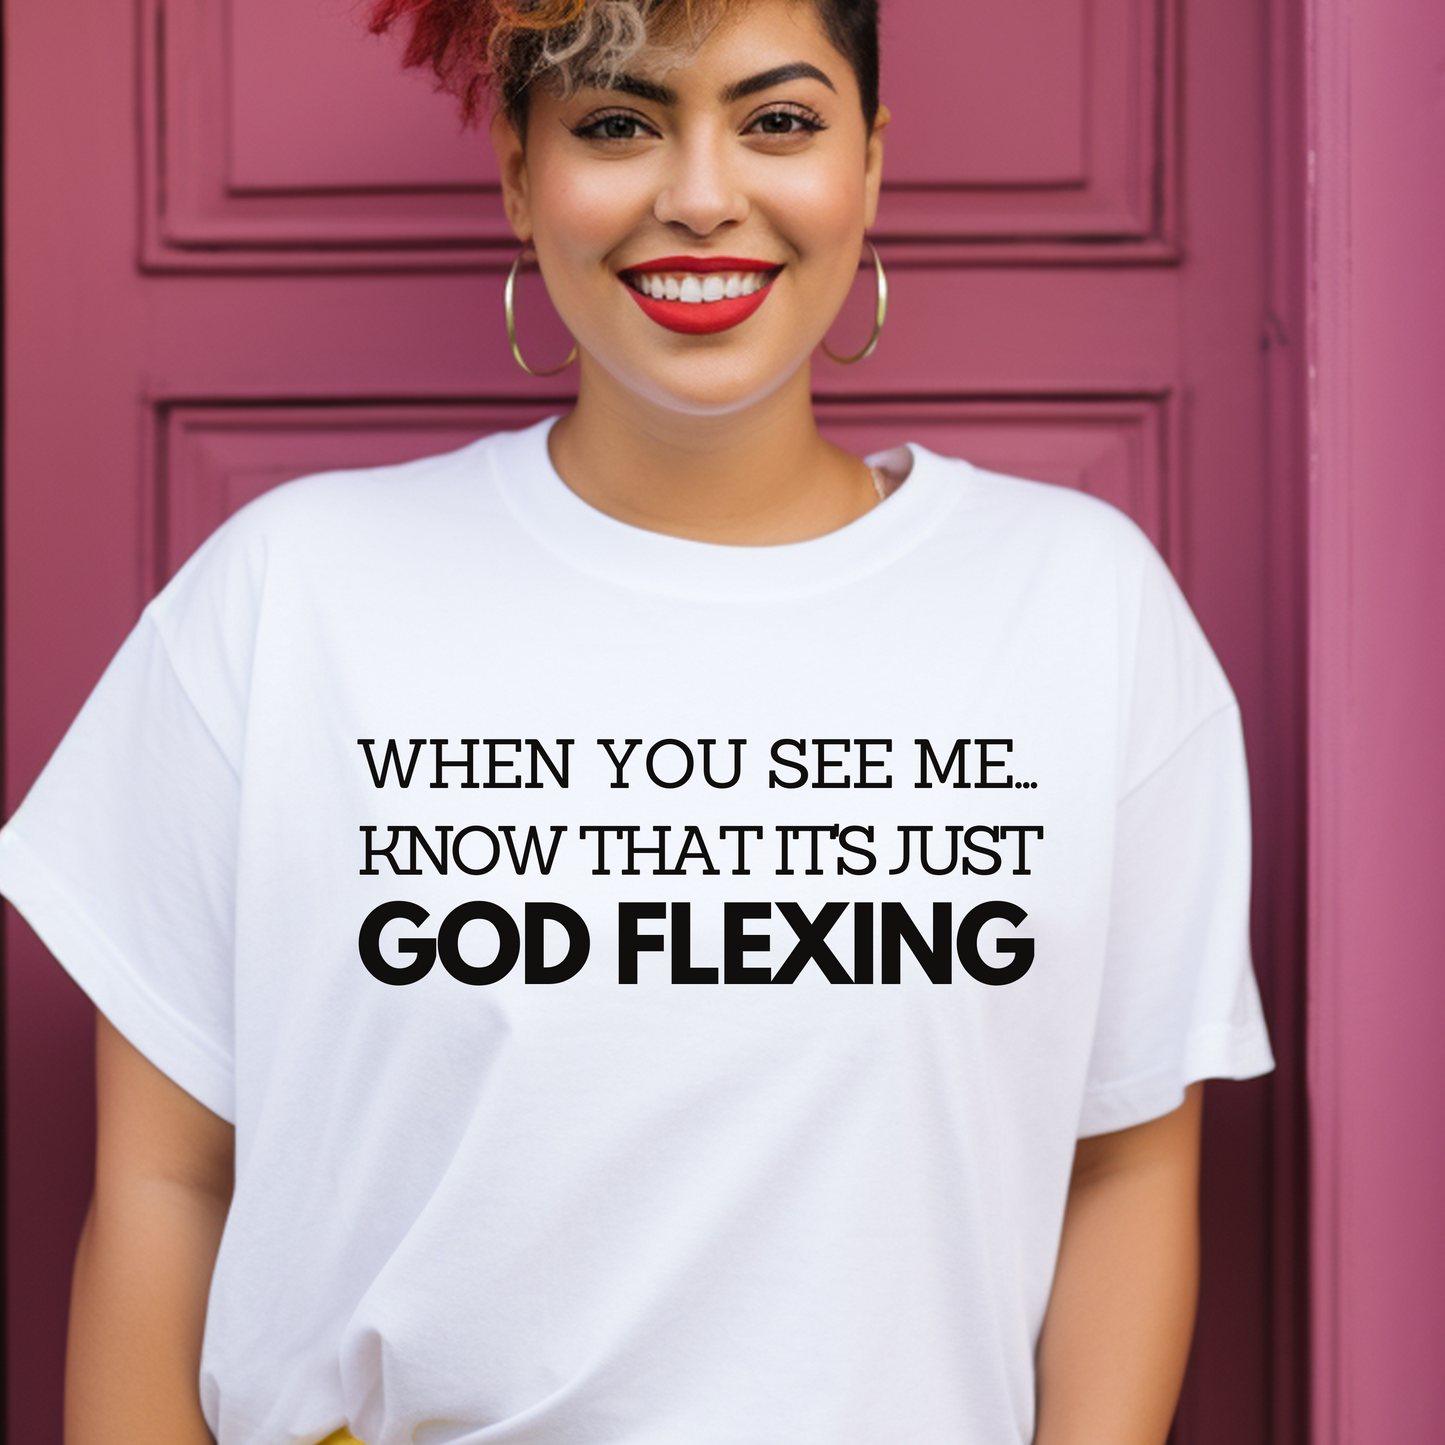 Sleek white 'When You See Me Know That it's just God Flexing' T-shirt from Triumph Tees. This faith-oriented apparel is a stylish way to represent your belief and respect for God.